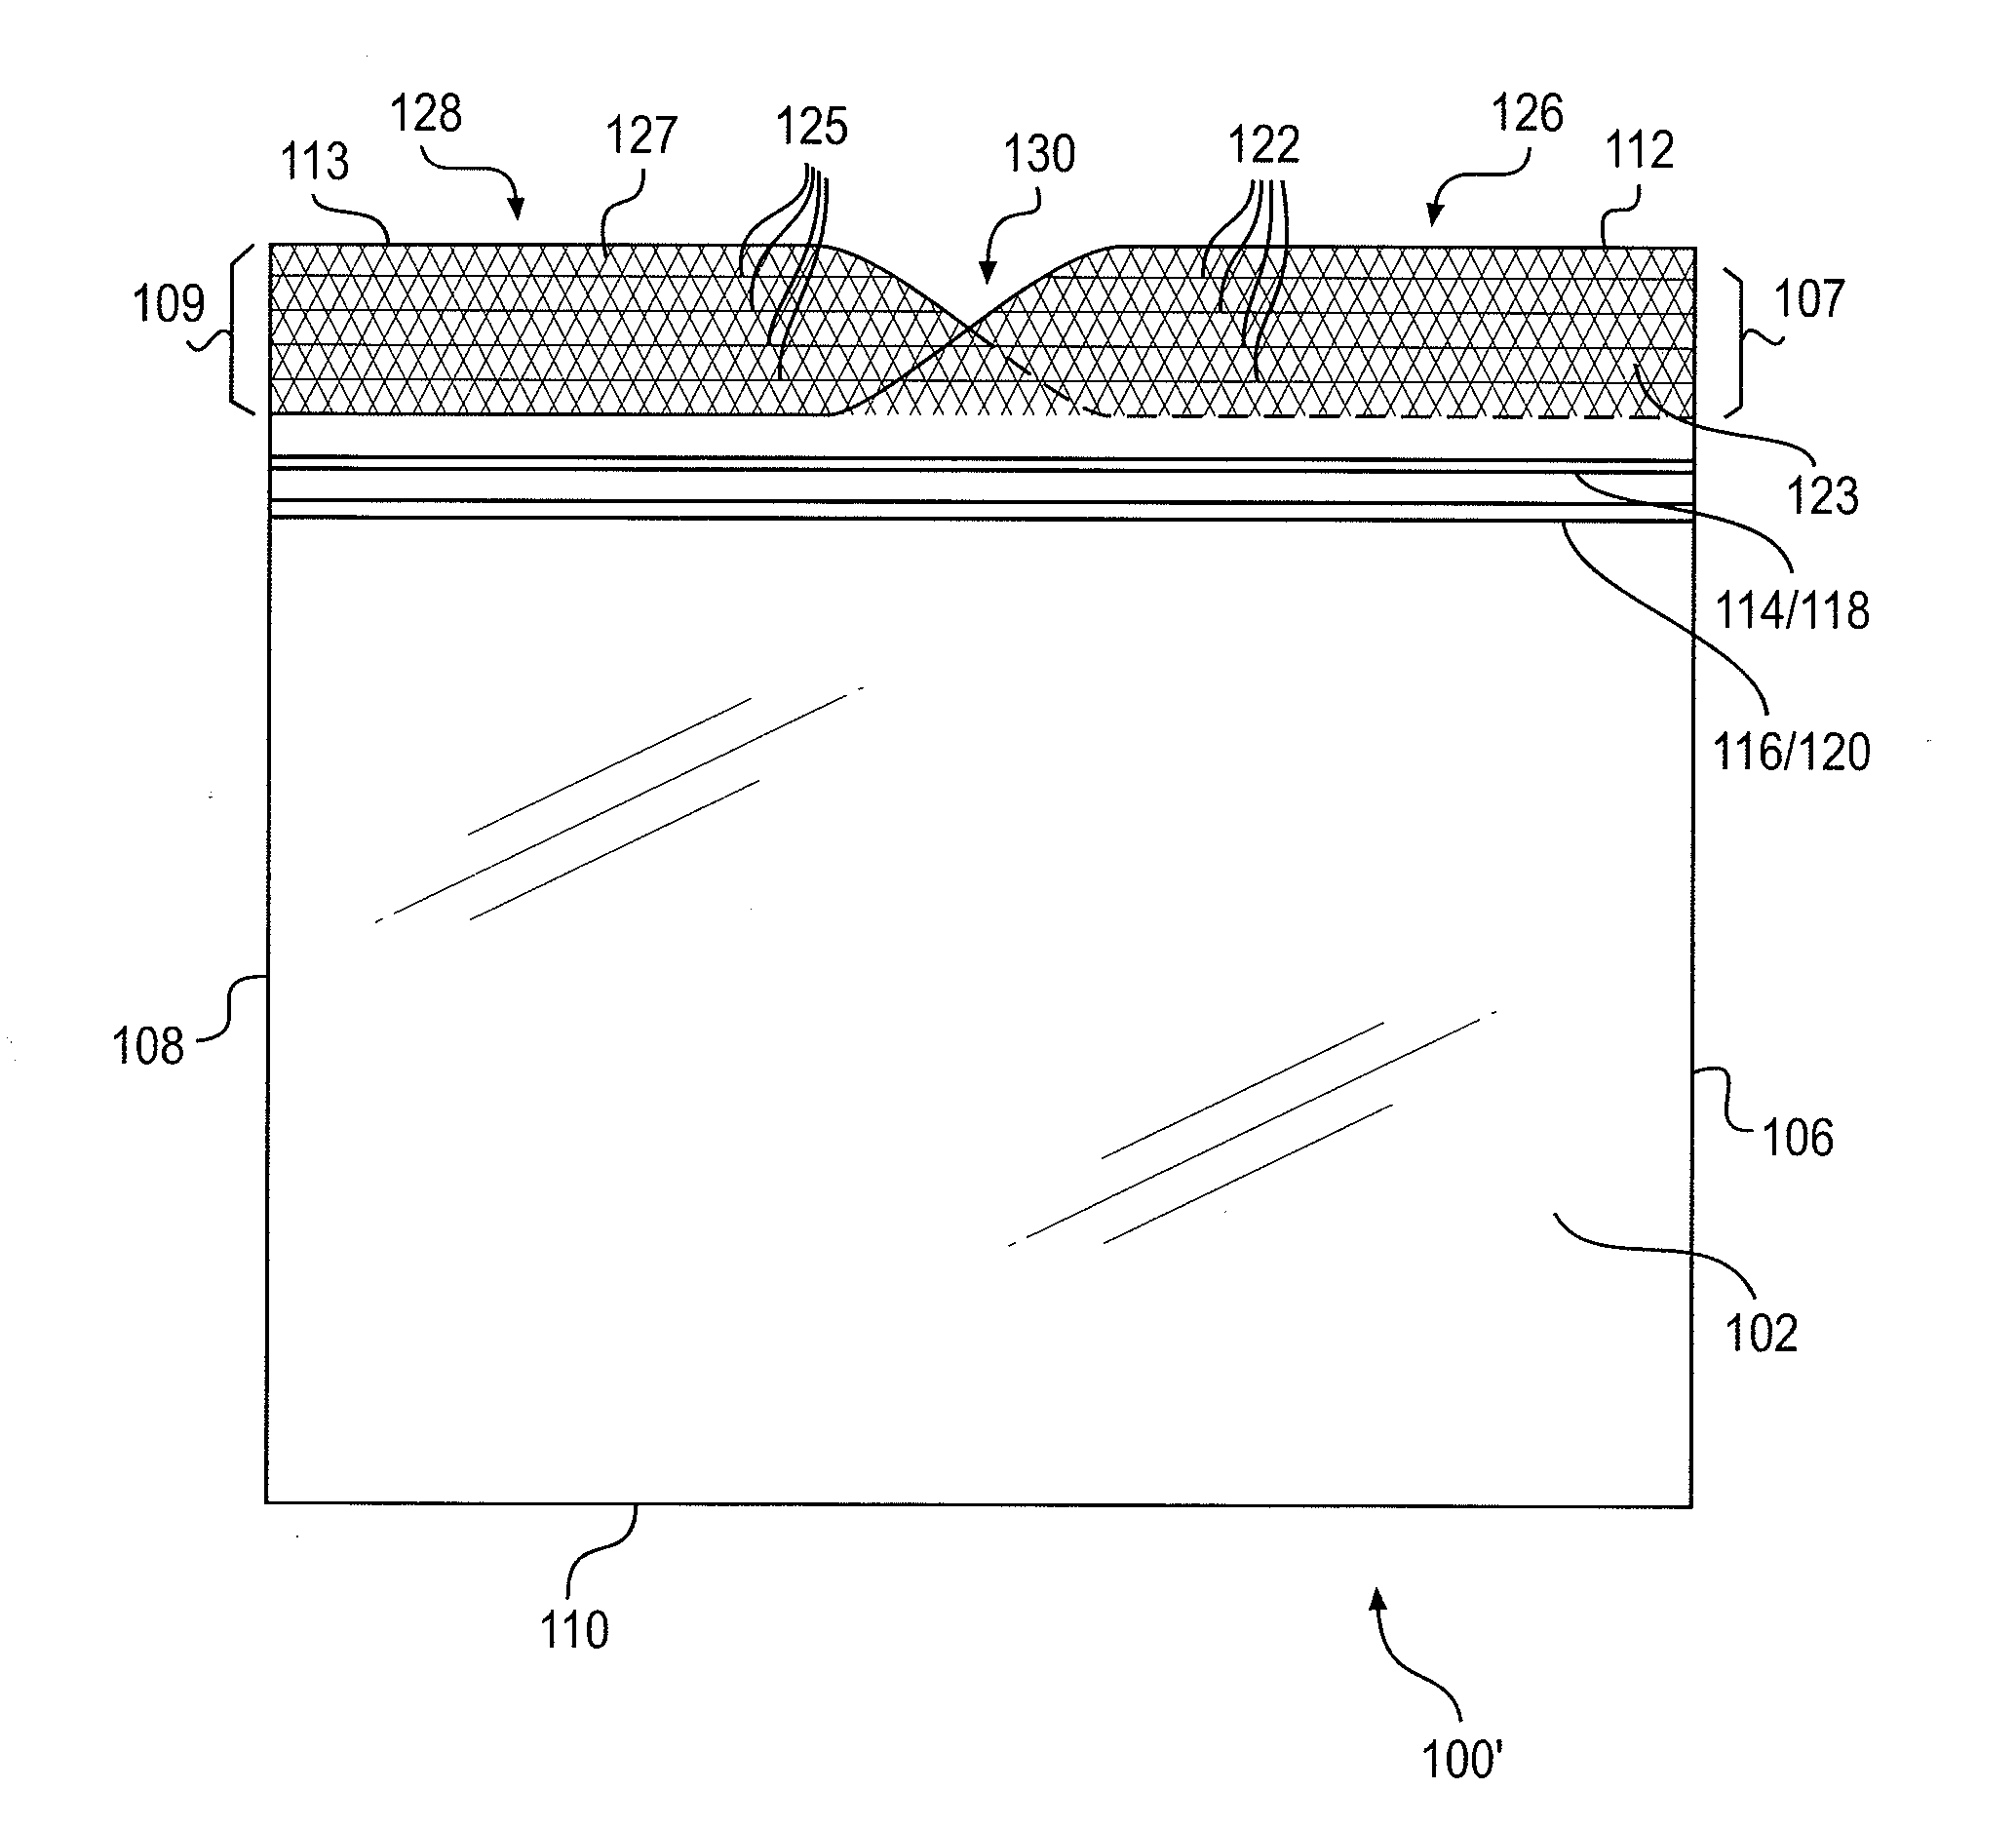 Storage Bag With Textured Area On Lips To Facilitate Closing Process